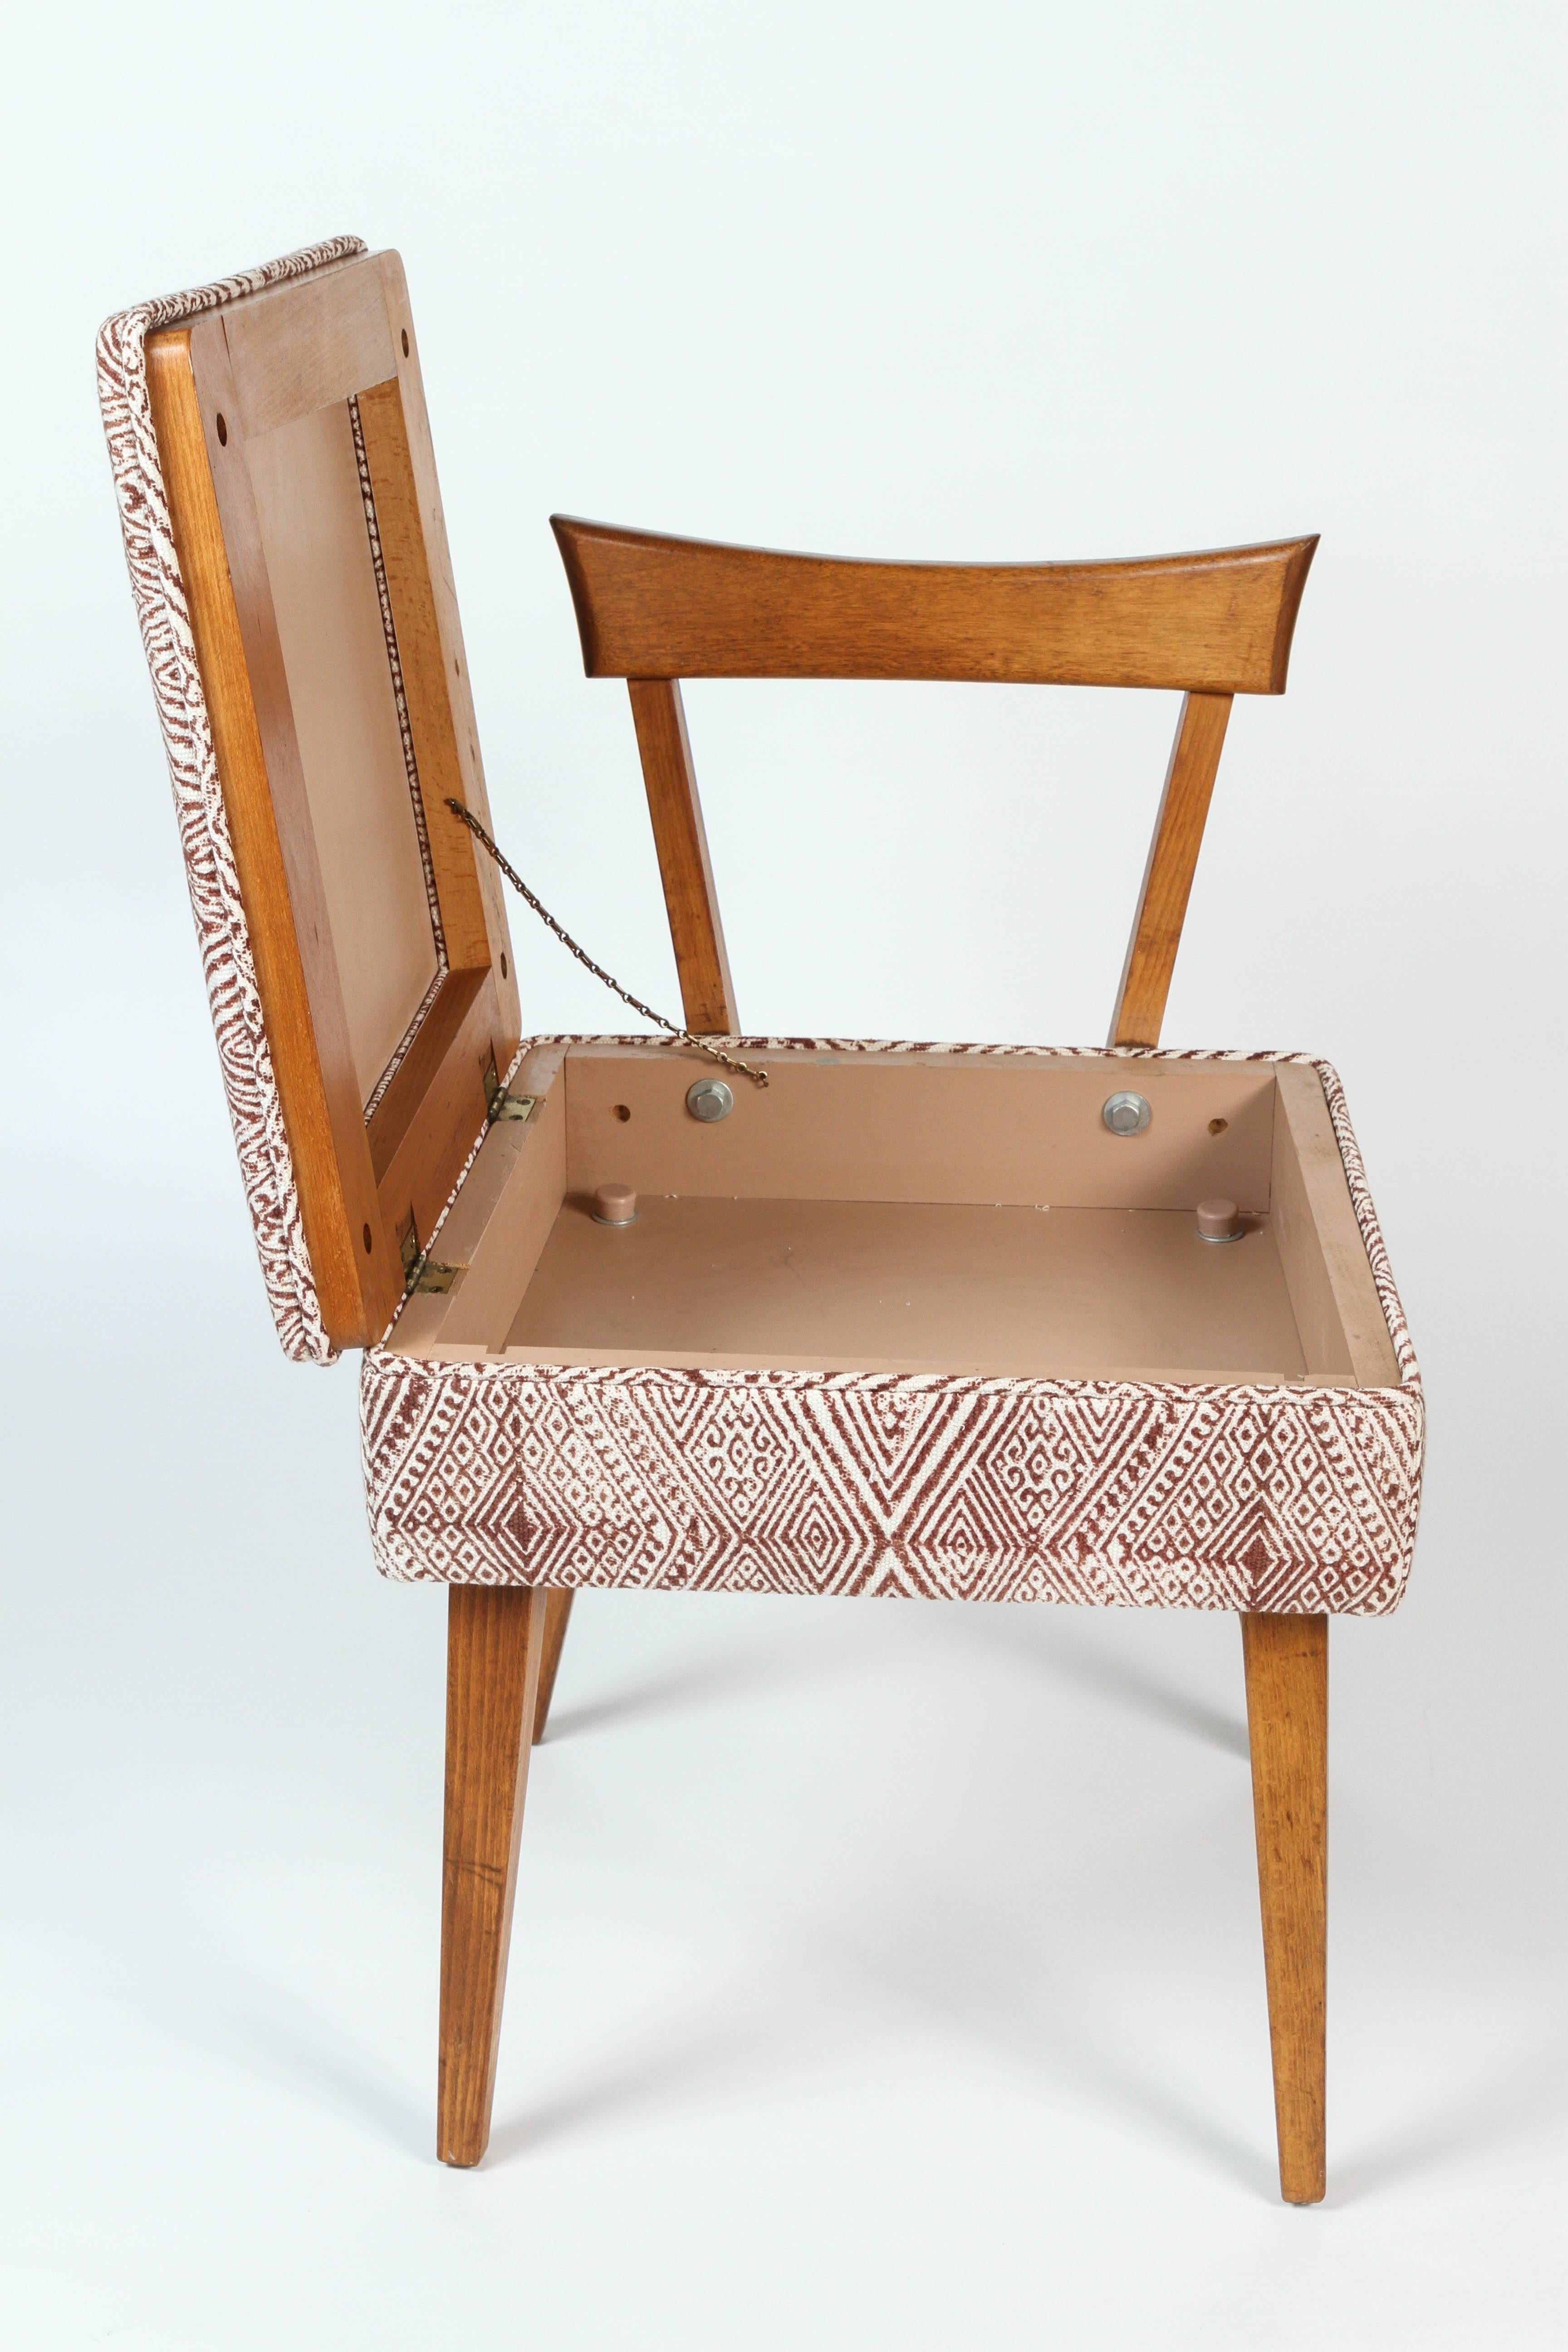 sewing chair with wheels